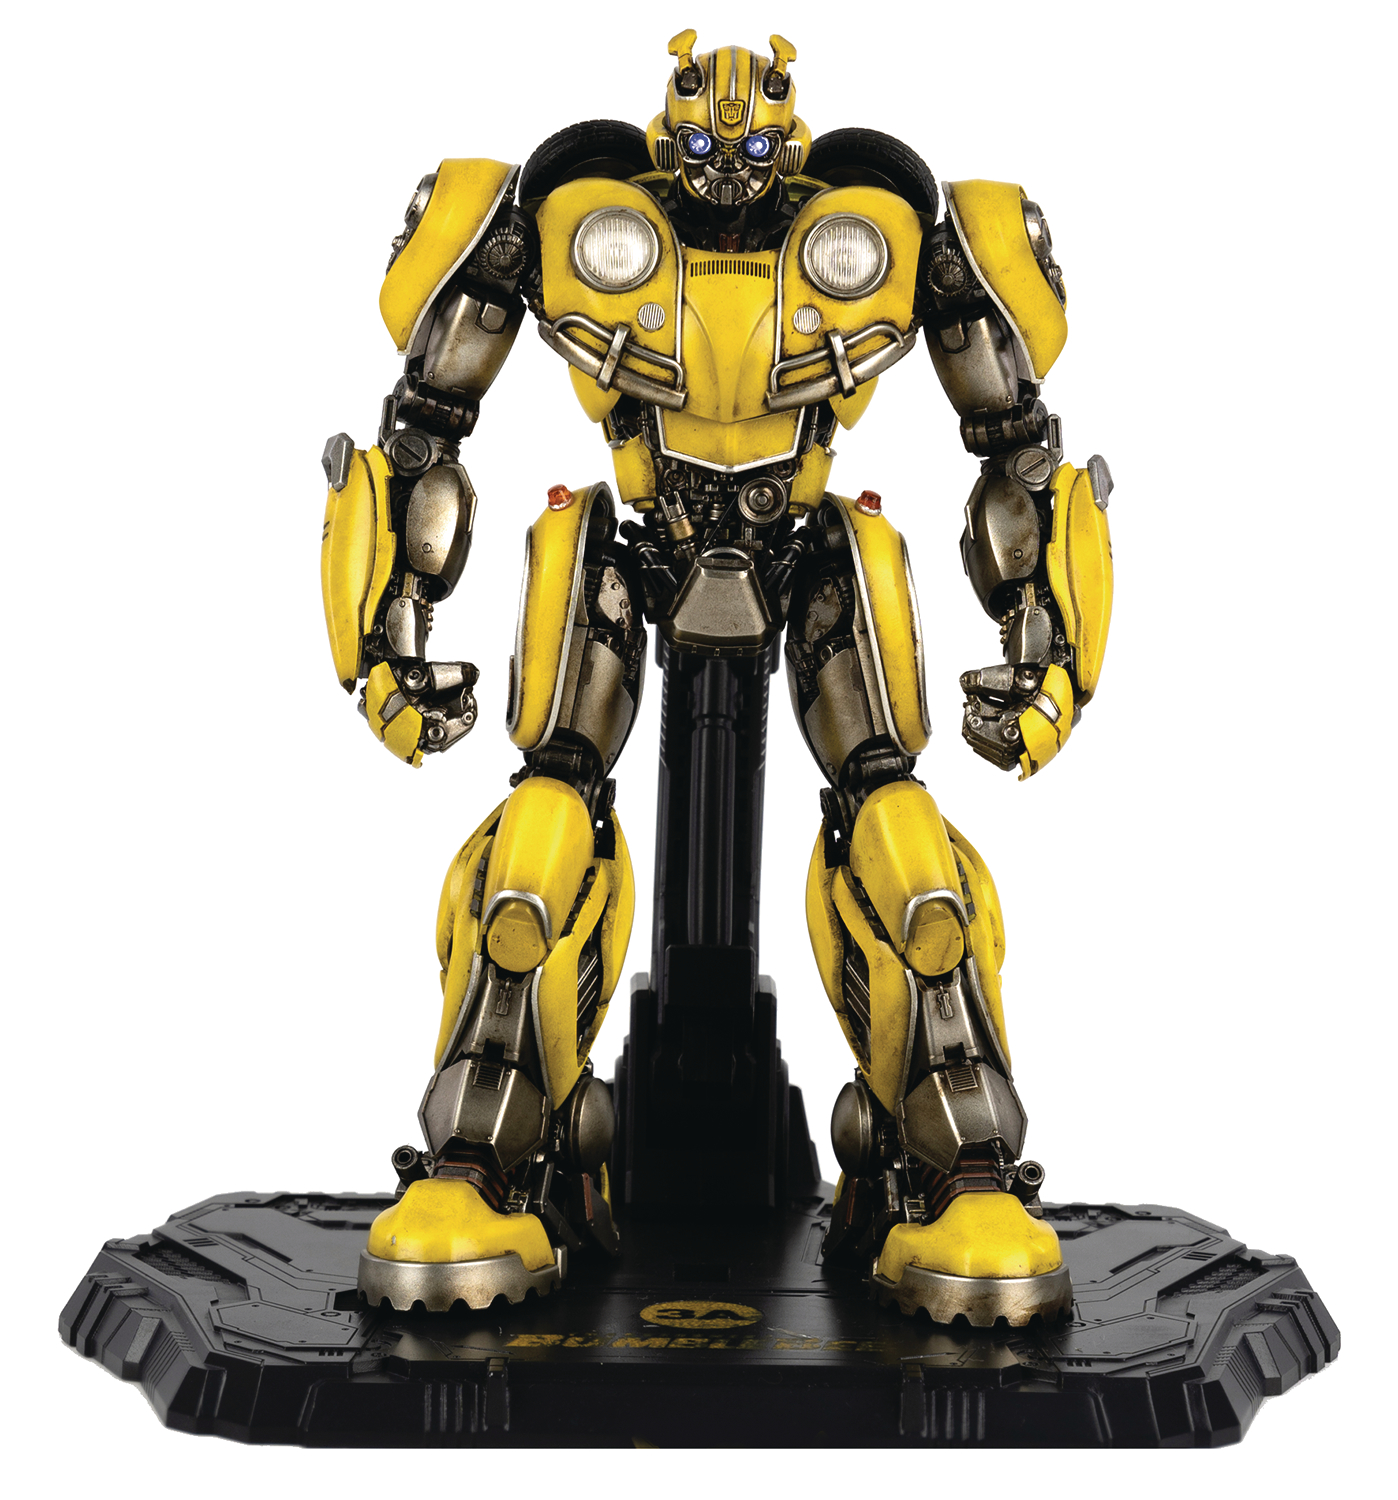 TRANSFORMERS BUMBLEBEE DLX SCALE FIG